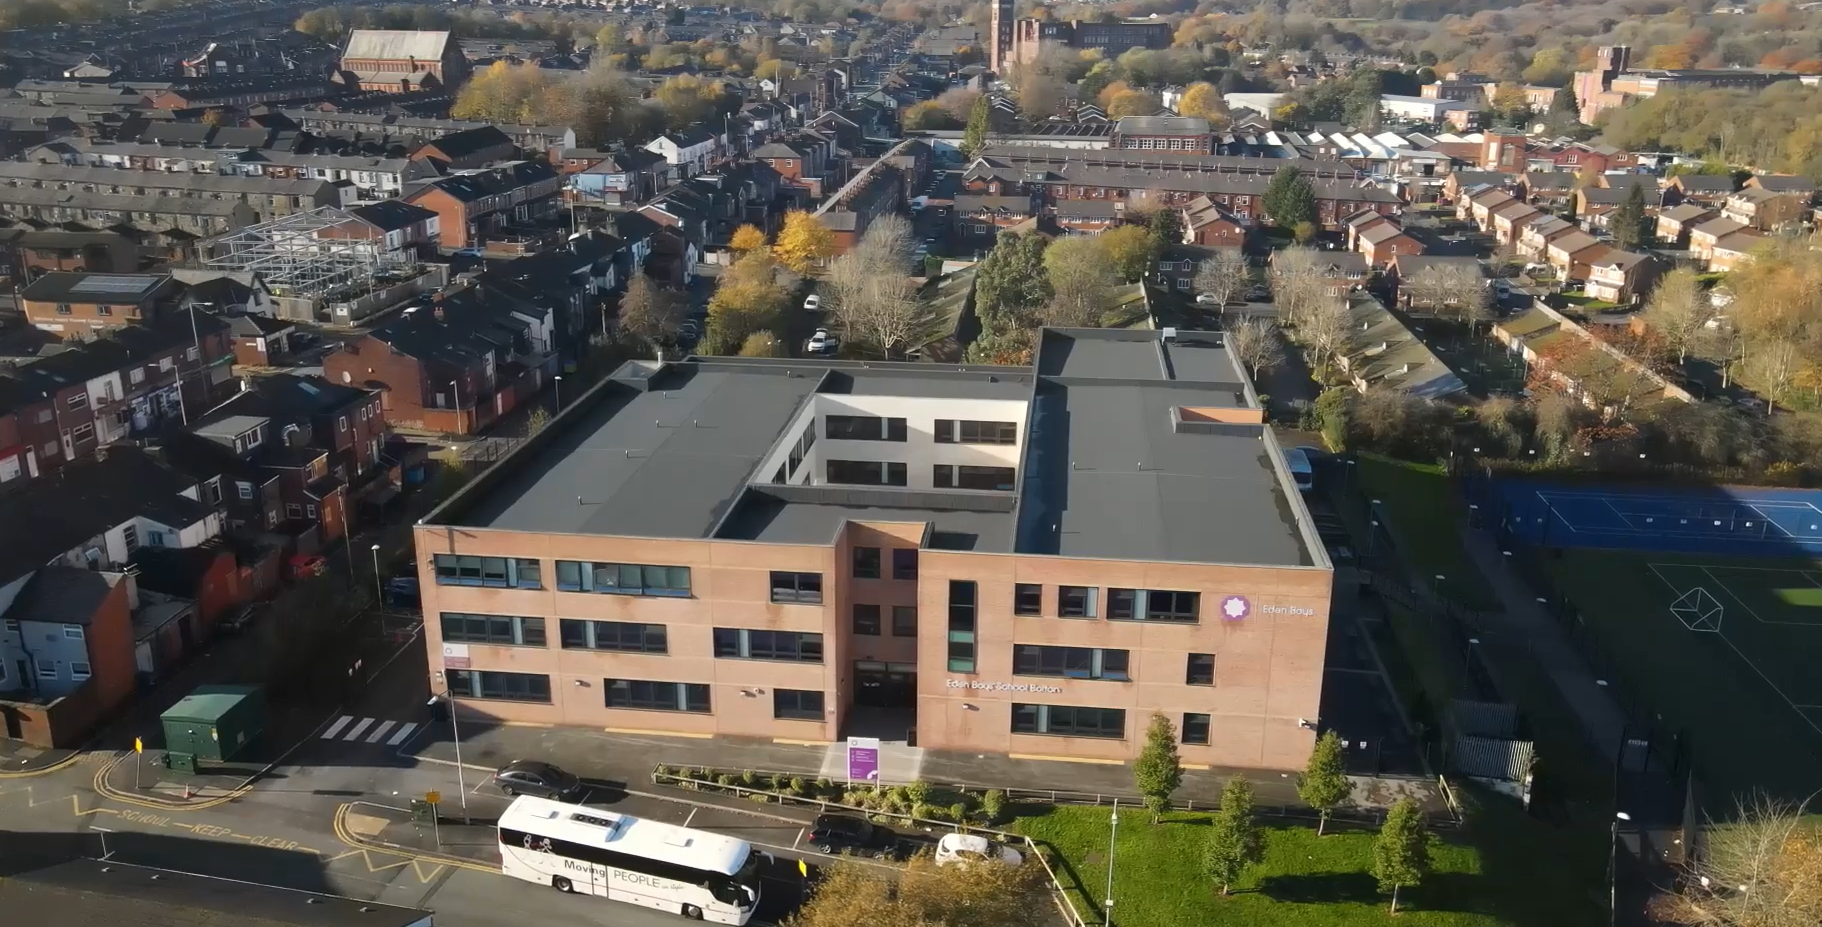 Aerial view of Eden Boys School captured by a drone, showcasing the school's layout and surrounding area.